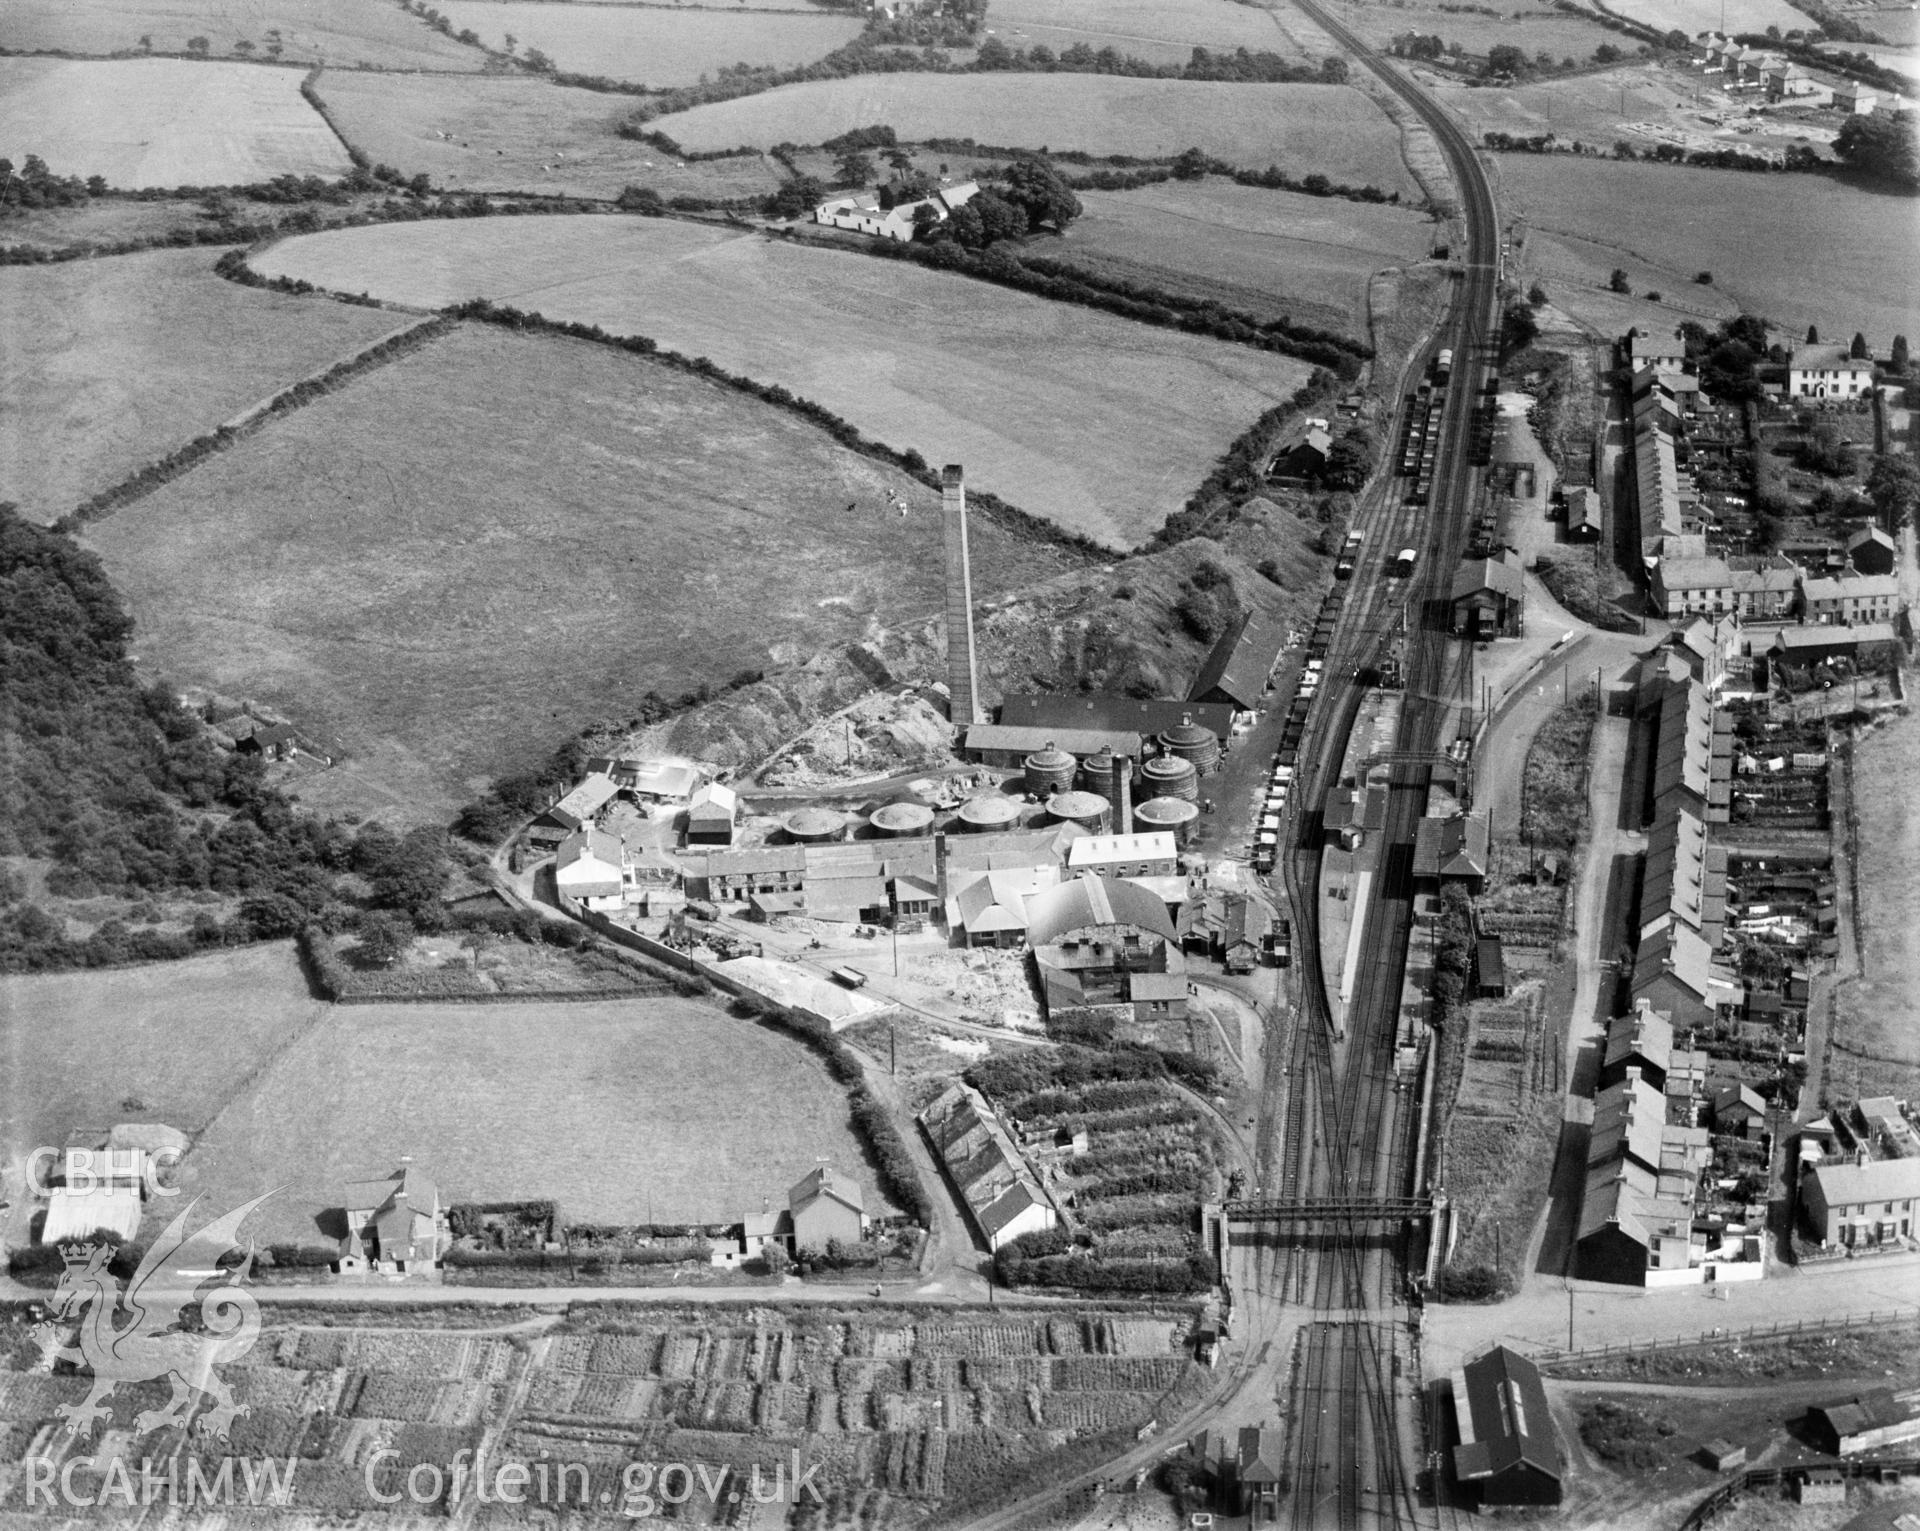 View of Hirwaun brickworks, commissioned by General Refractories. Oblique aerial photograph, 5?x4? BW glass plate.